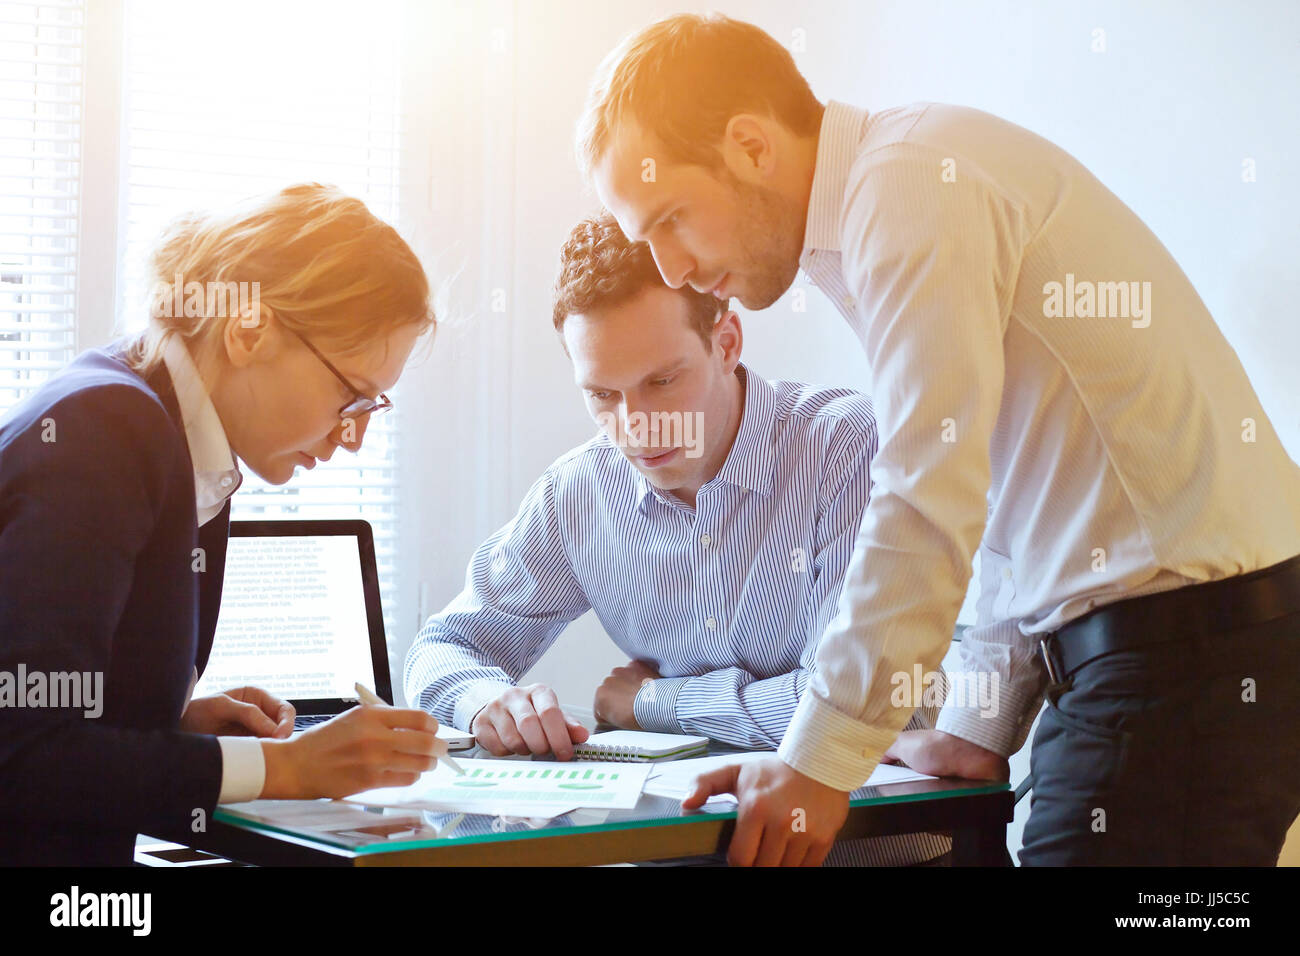 brainstorming, teamwork concept, business team working on a project, busy caucasian people in the office Stock Photo